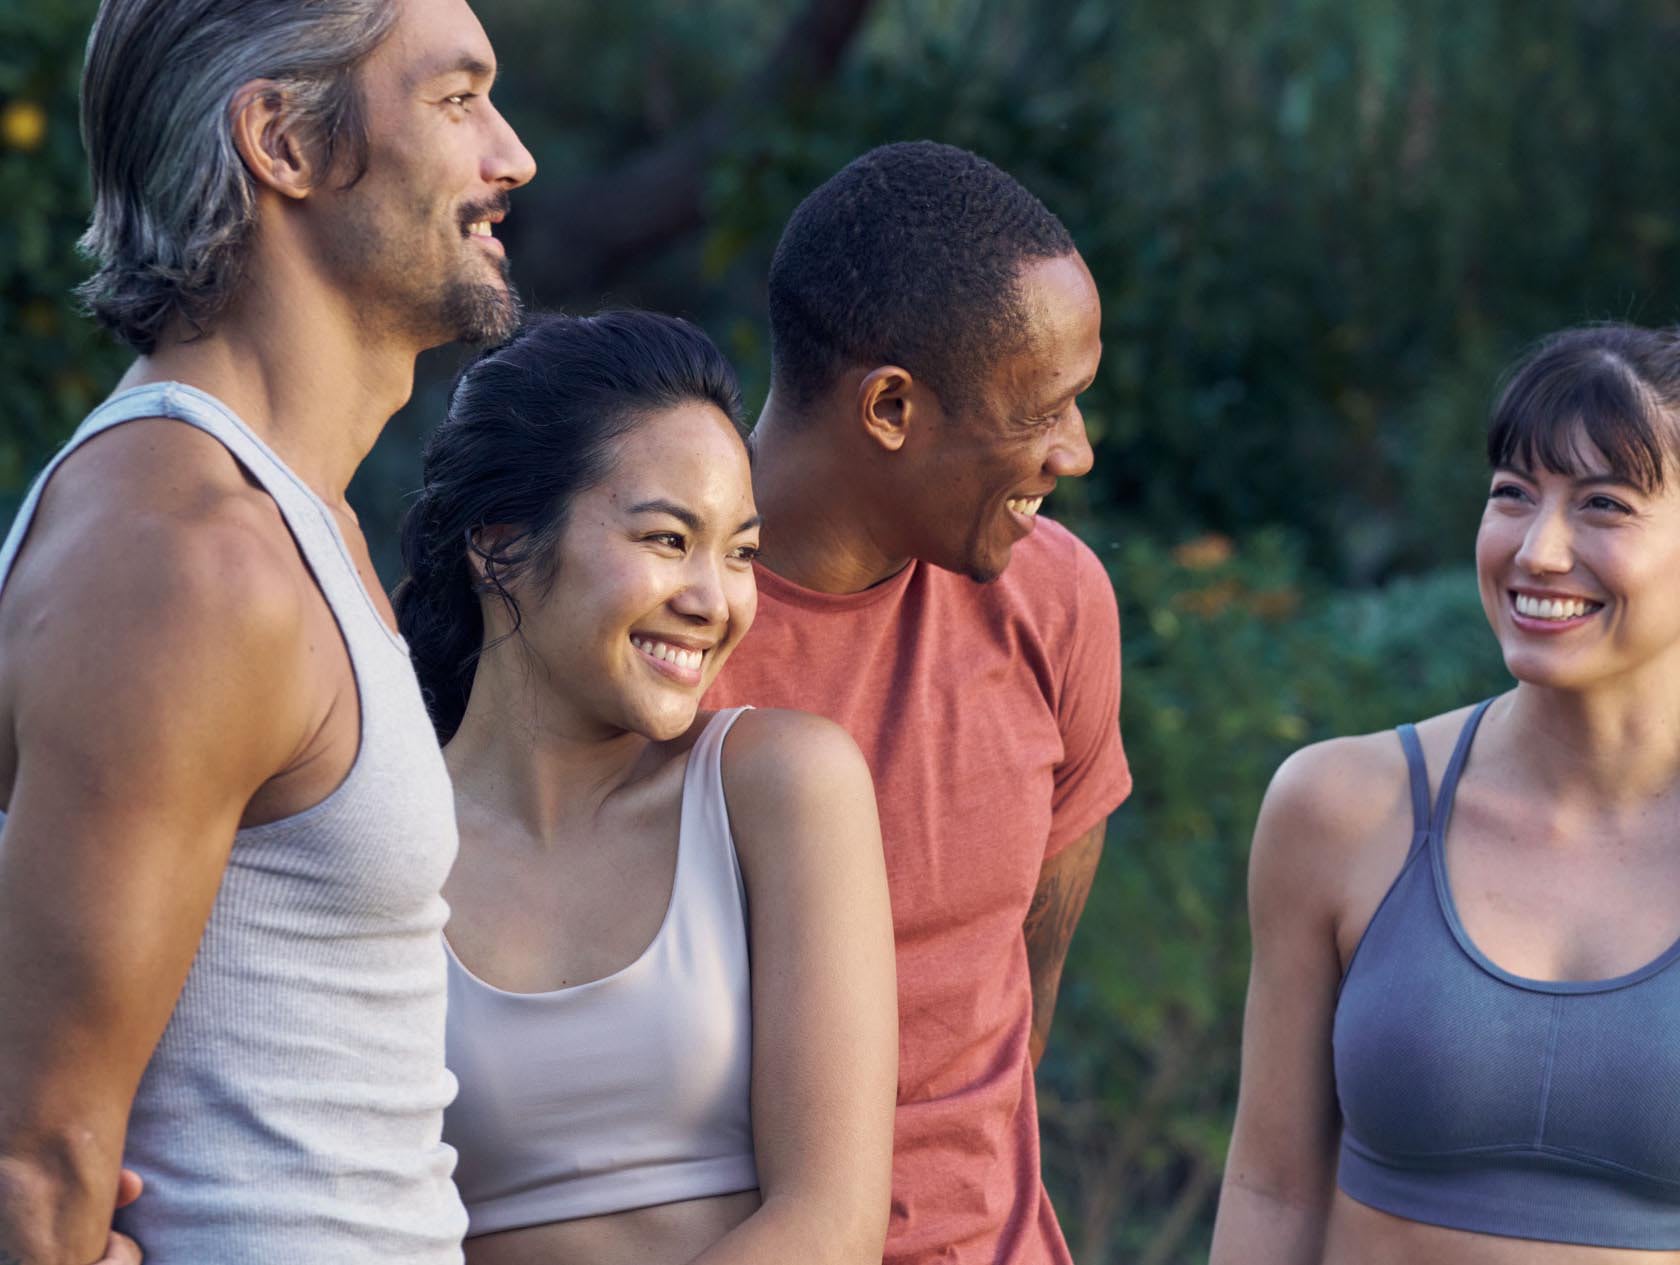 Group of 4 yoga practitioners smiling